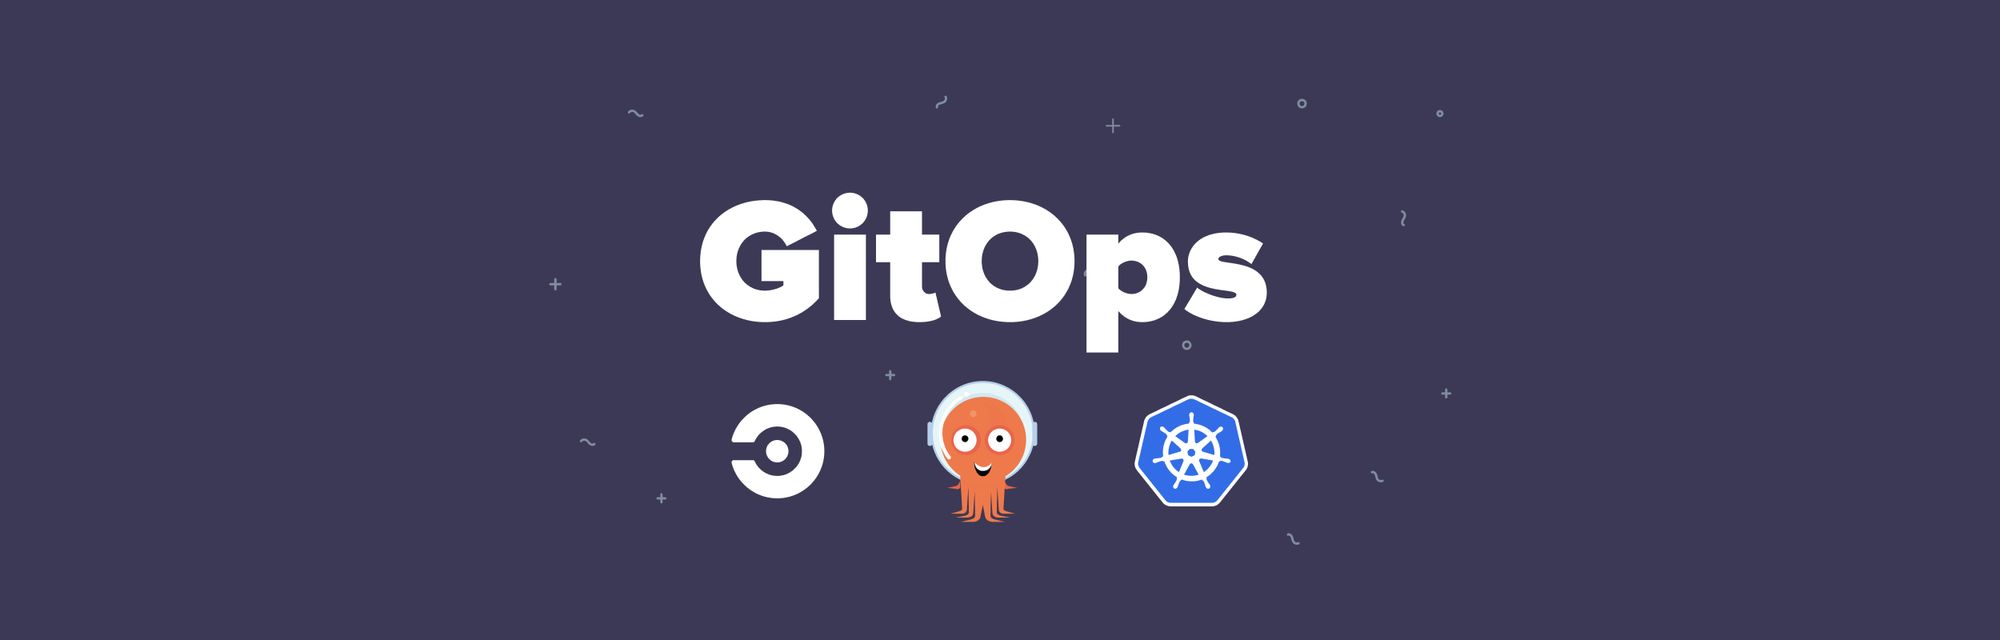 GitOps step-by-step guide: deploy a CI/CD using CircleCI, ArgoCD and Kubernetes